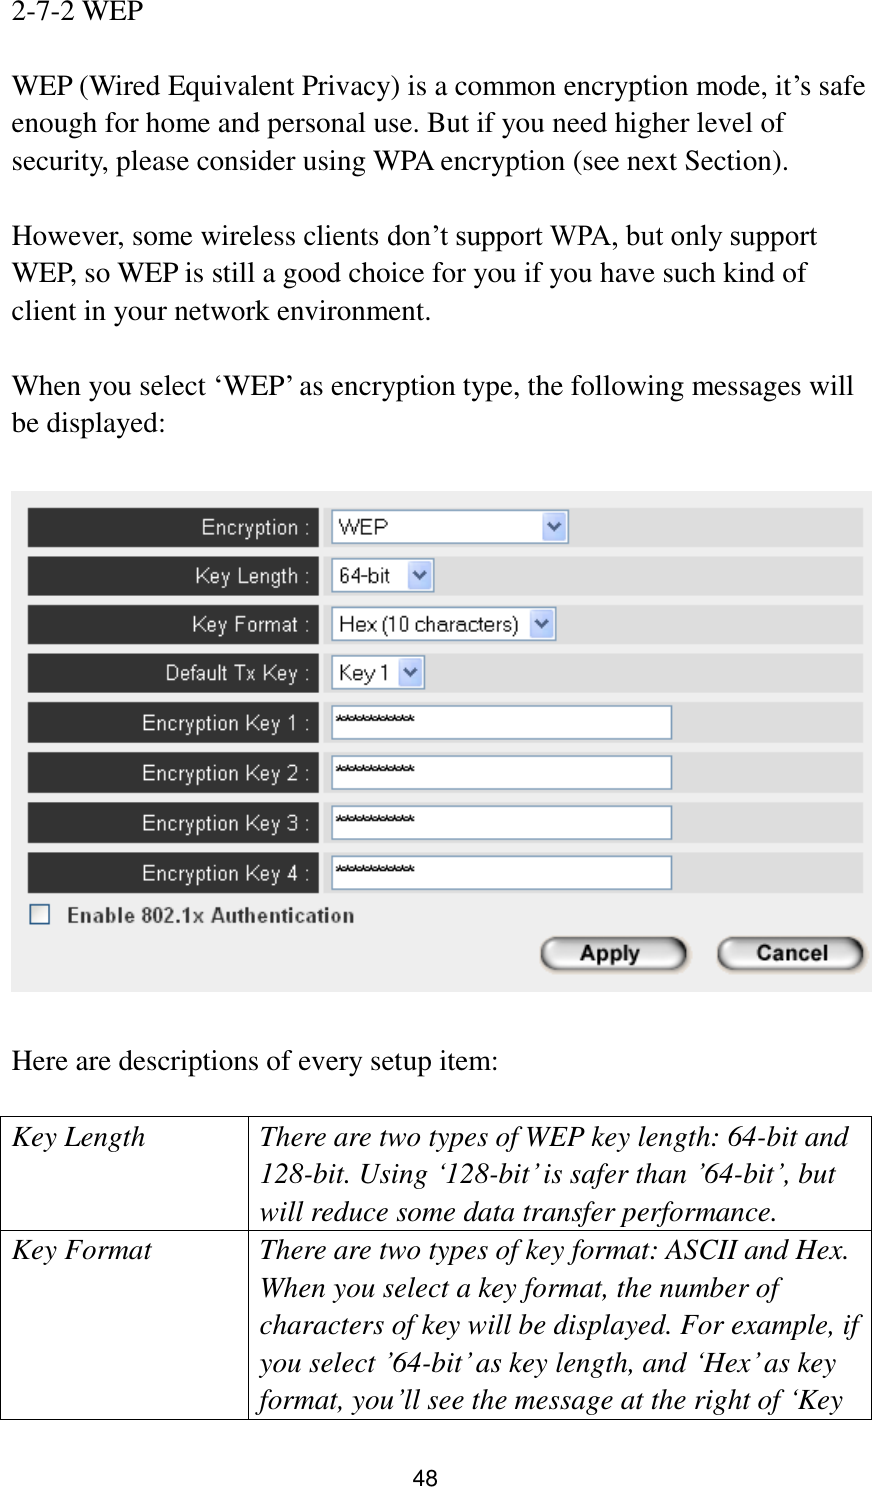 48 2-7-2 WEP  WEP (Wired Equivalent Privacy) is a common encryption mode, it‟s safe enough for home and personal use. But if you need higher level of security, please consider using WPA encryption (see next Section).    However, some wireless clients don‟t support WPA, but only support WEP, so WEP is still a good choice for you if you have such kind of client in your network environment.  When you select „WEP‟ as encryption type, the following messages will be displayed:    Here are descriptions of every setup item:  Key Length There are two types of WEP key length: 64-bit and 128-bit. Using „128-bit‟ is safer than ‟64-bit‟, but will reduce some data transfer performance. Key Format There are two types of key format: ASCII and Hex. When you select a key format, the number of characters of key will be displayed. For example, if you select ‟64-bit‟ as key length, and „Hex‟ as key format, you‟ll see the message at the right of „Key 